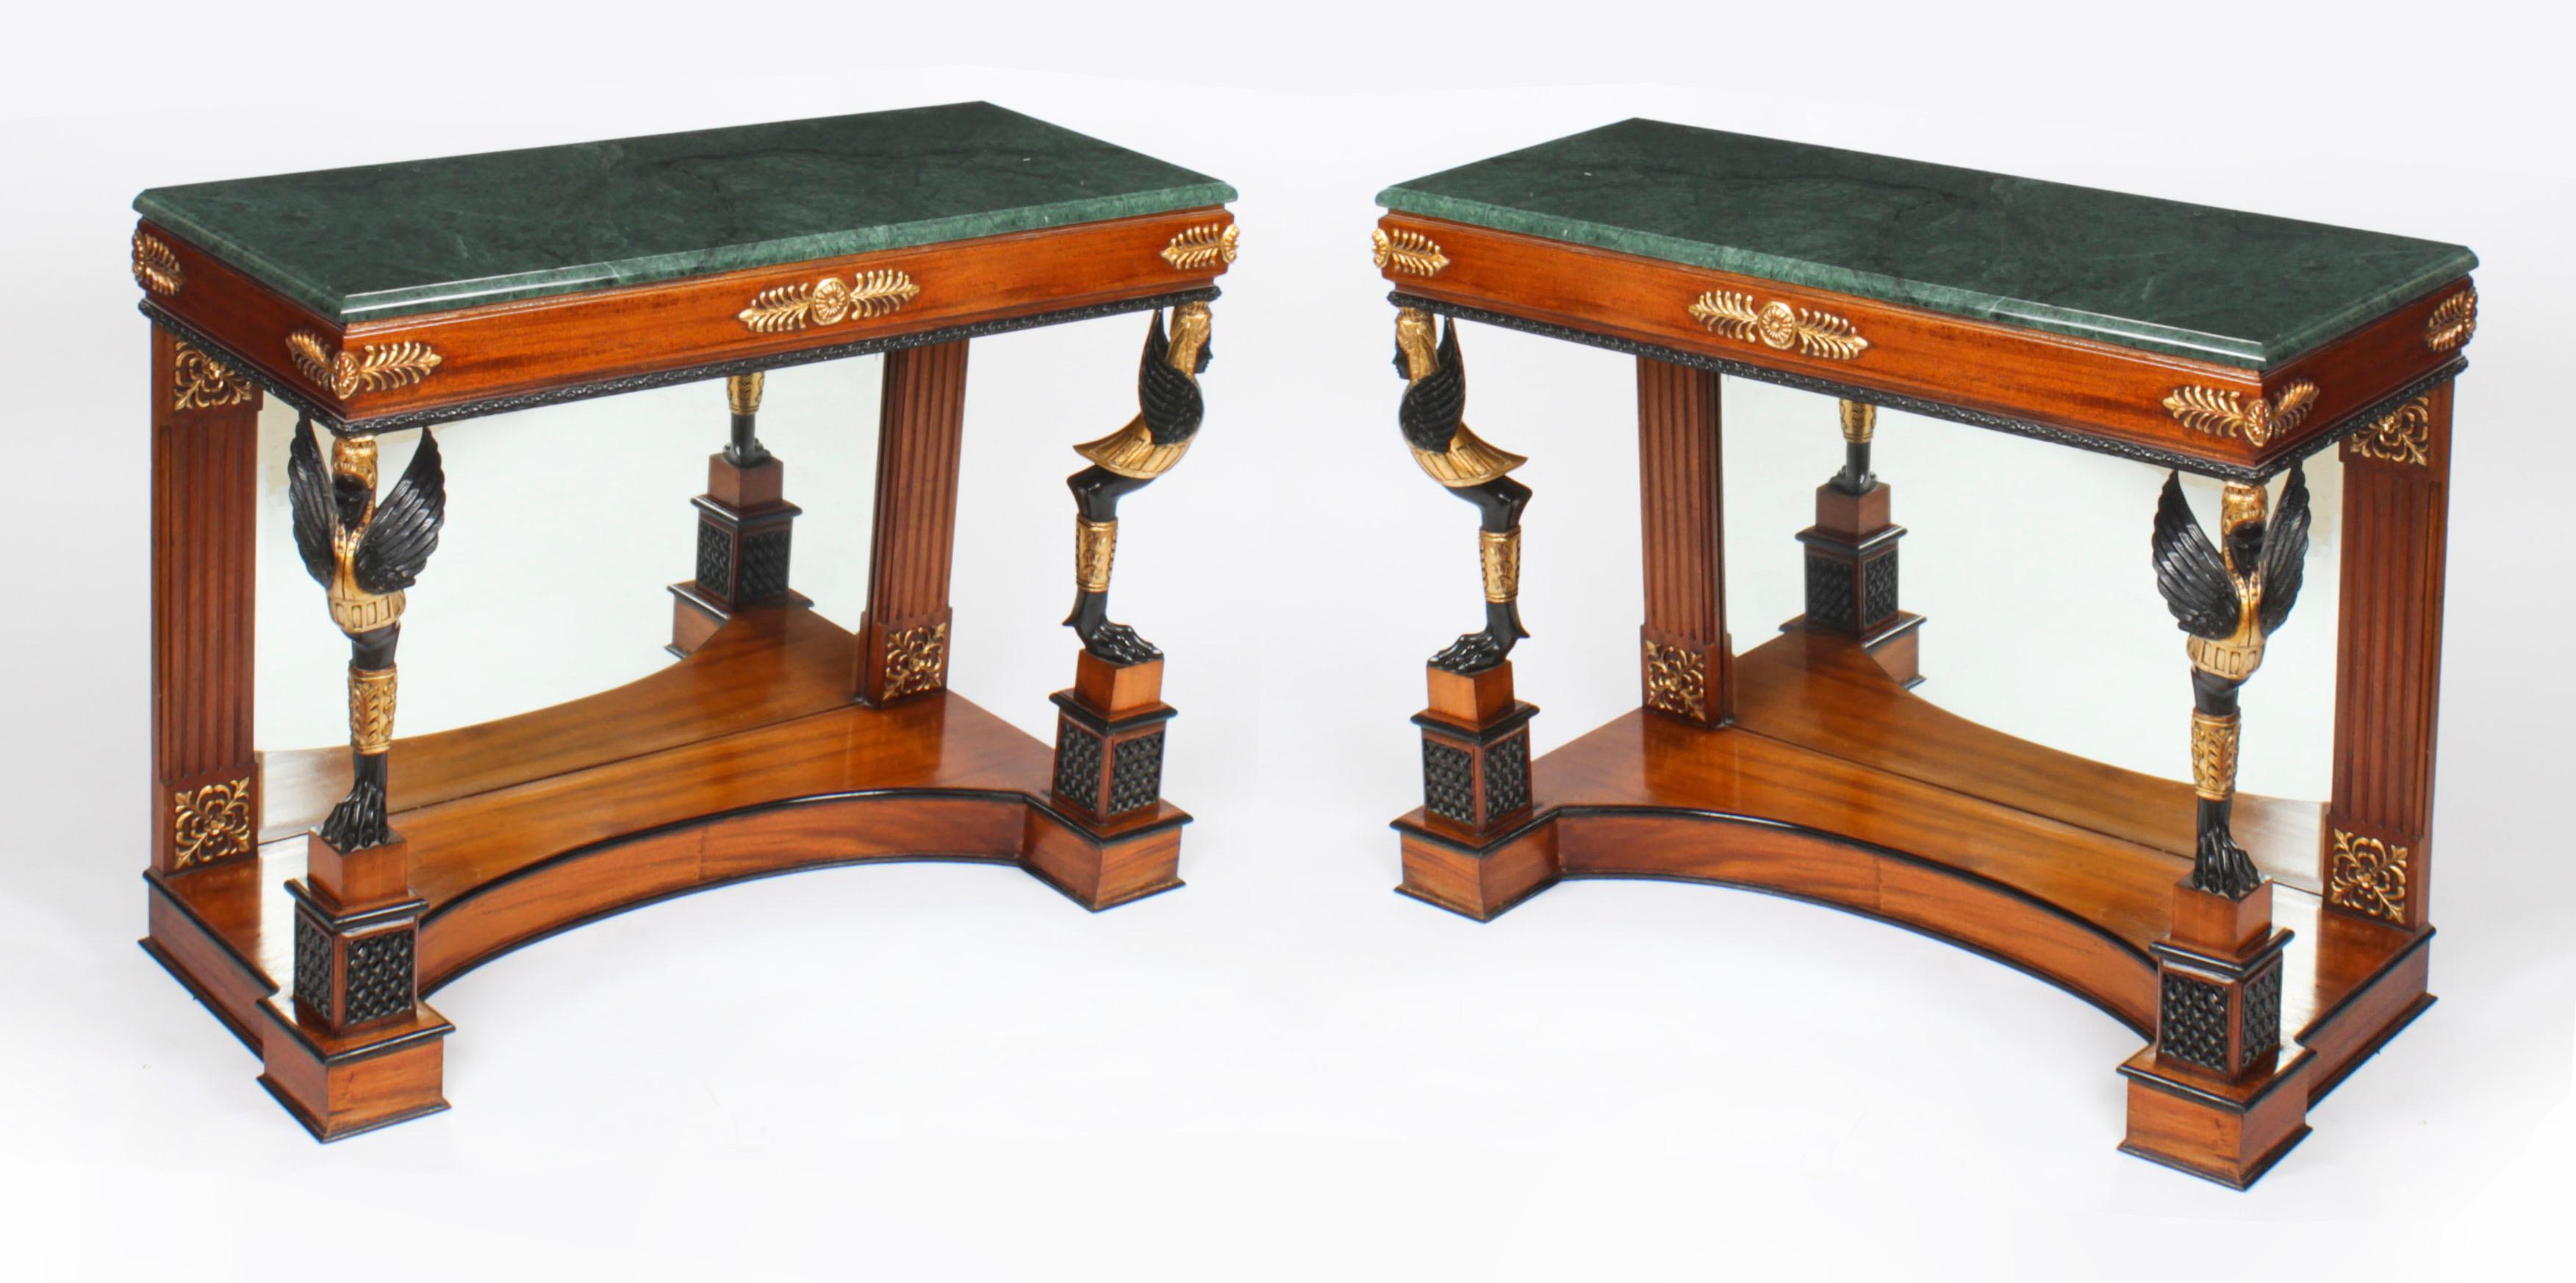 This is a beautiful vintage pair of Empire Revival mahogany gilt and ebonised console tables with striking green Verde Antico marble tops, dating from the last quarter of the 20th Century.

The tables have wonderful decorative winged figural